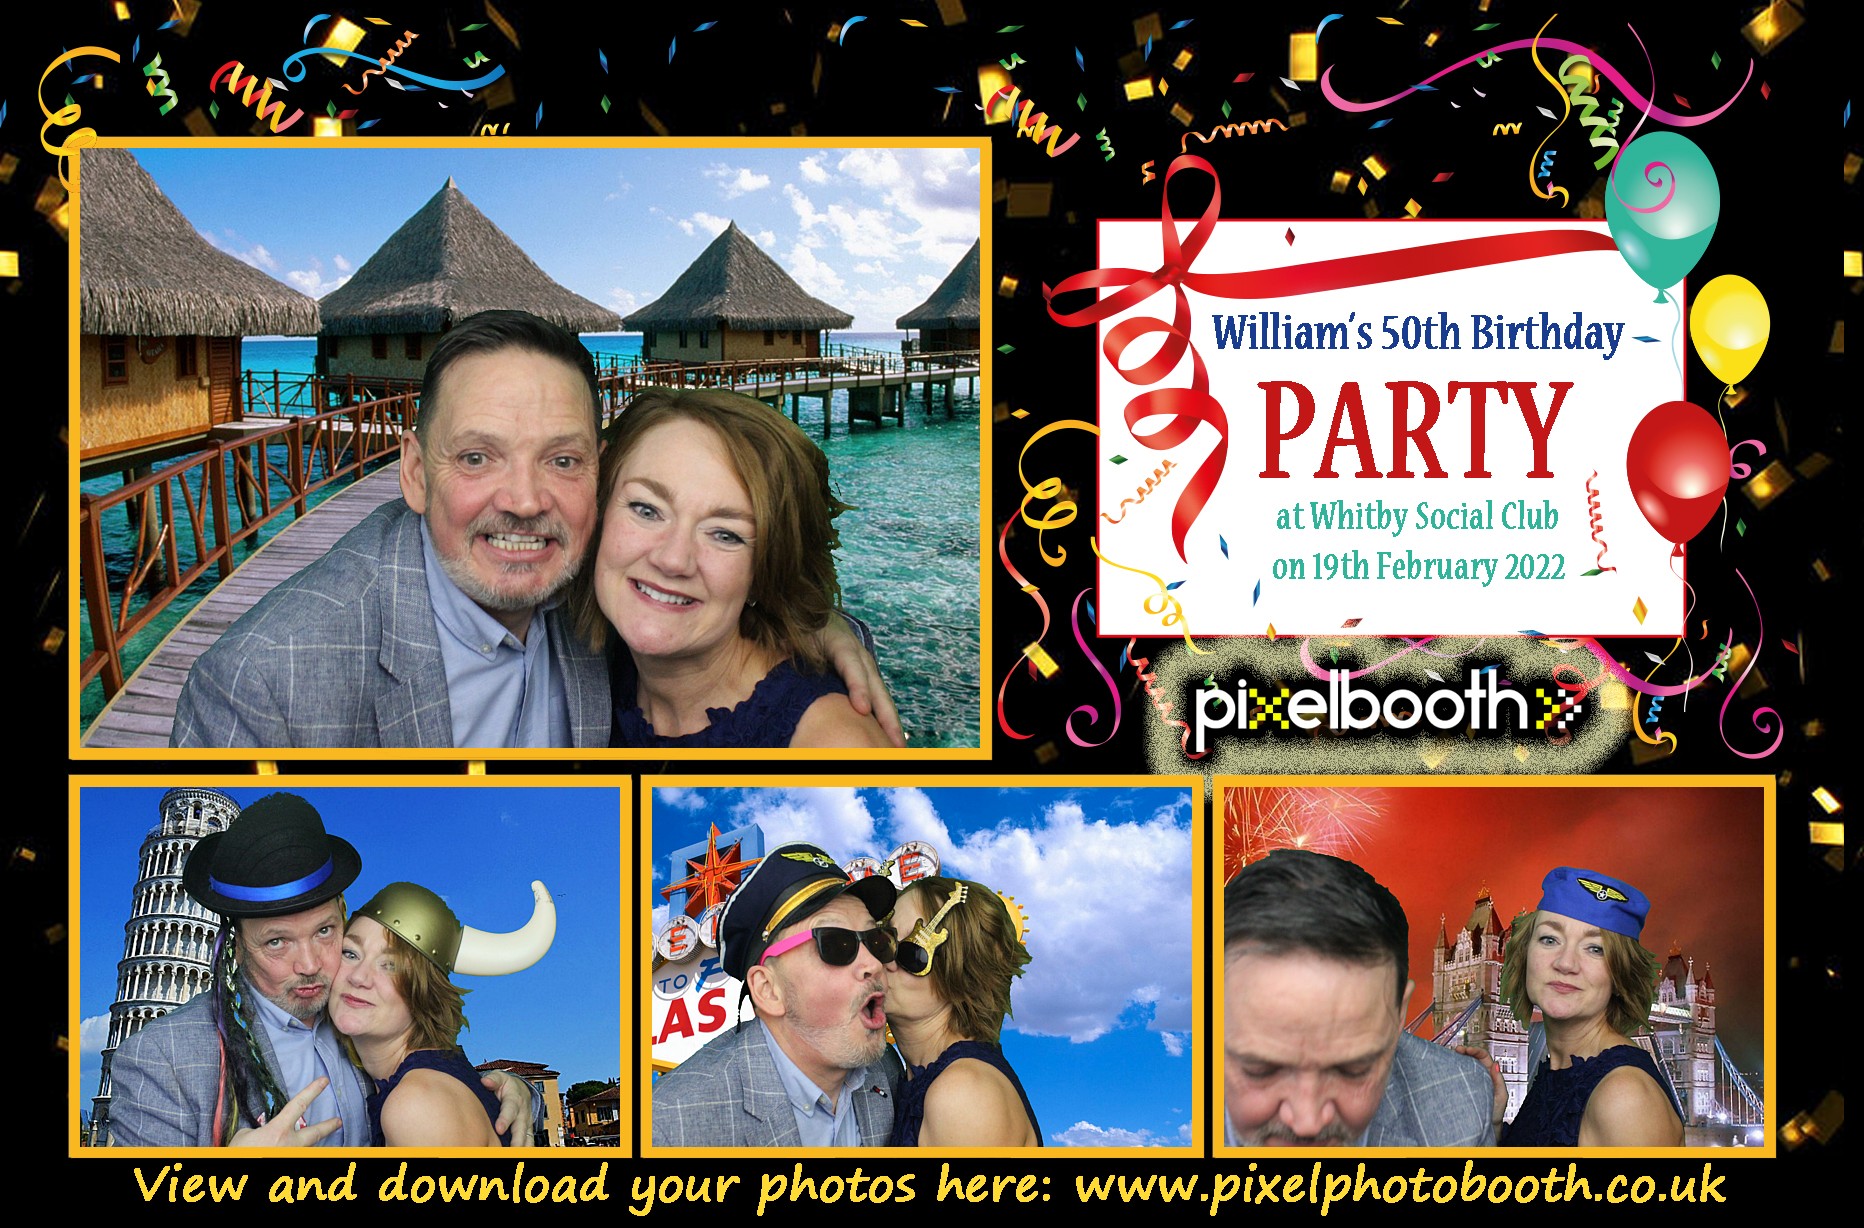 19th Feb 2022: William's 50th Birthday Party at Whitby Social Club